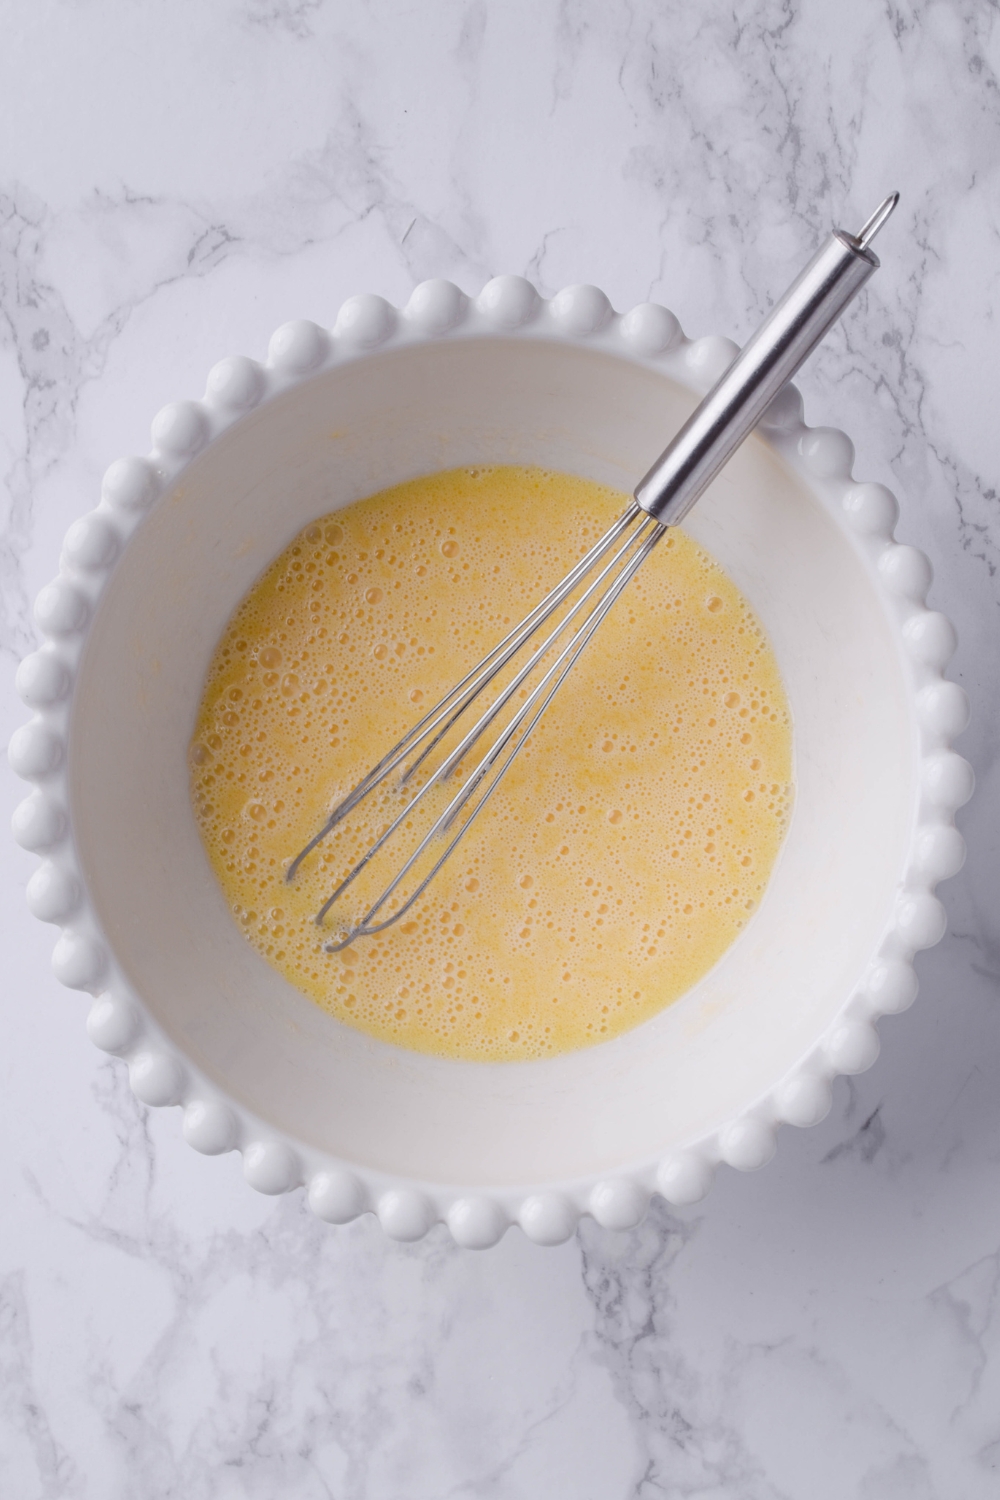 A mixing bowl with whisked egg mixture.